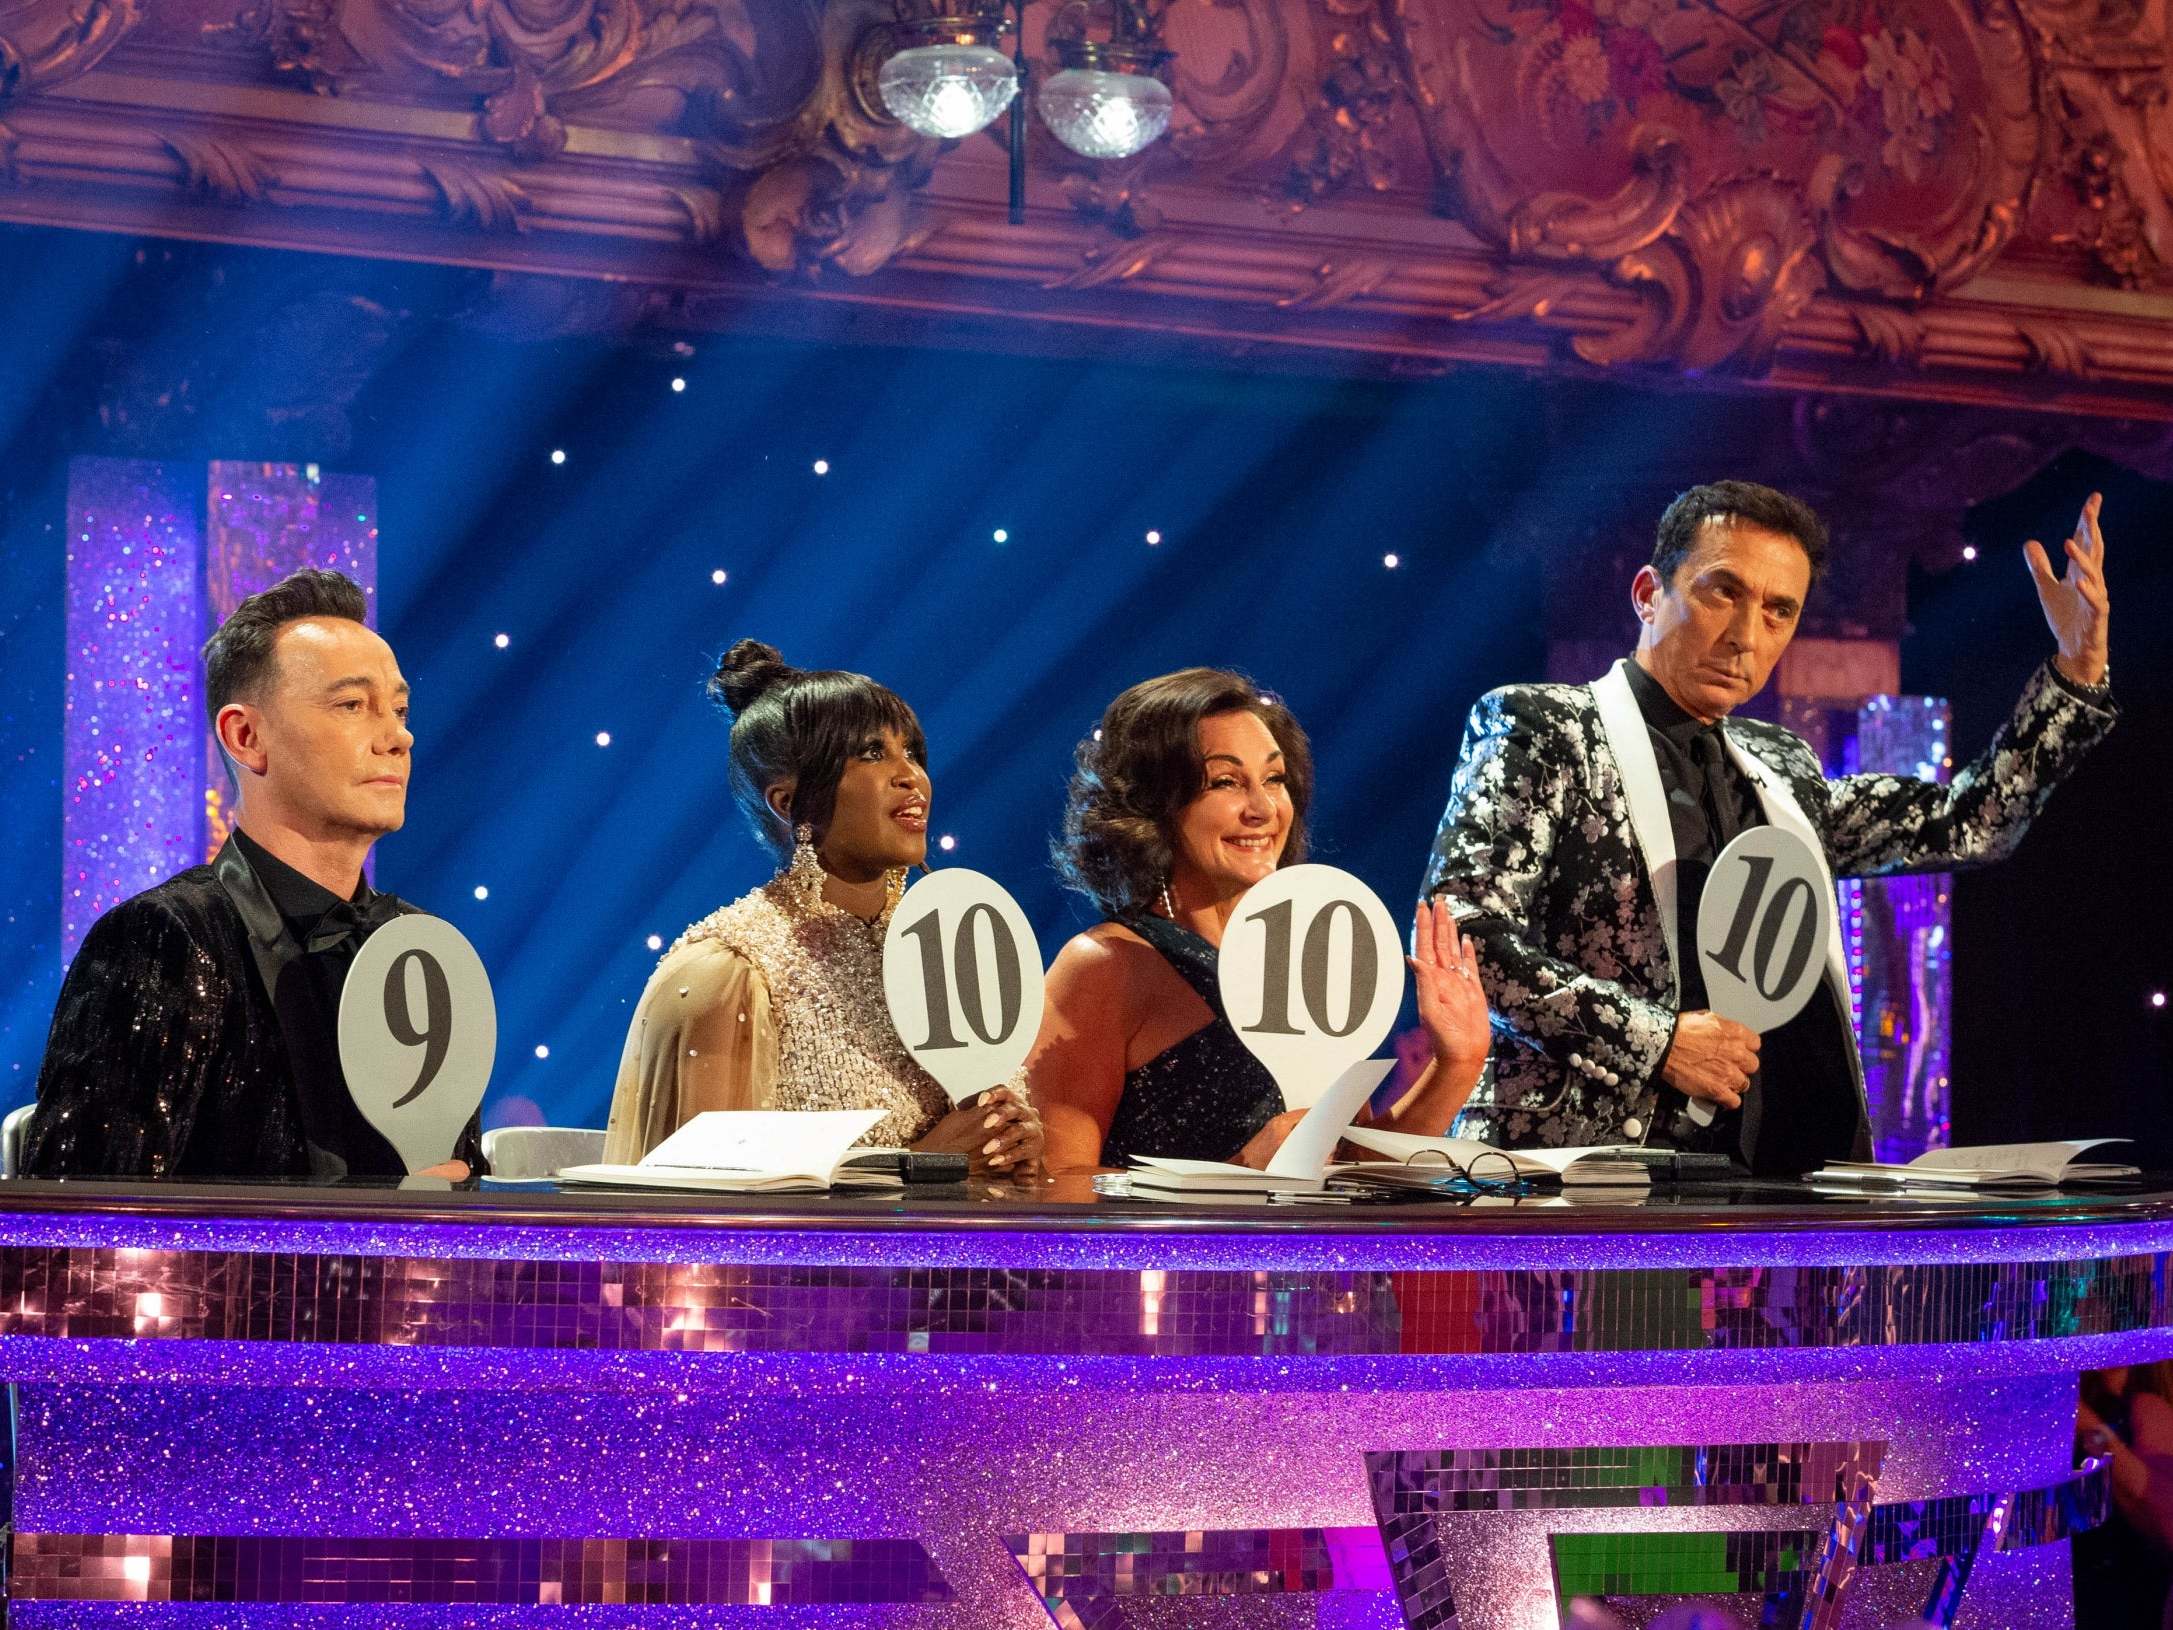 Tonioli (far right) on the ‘Strictly Come Dancing’ judging panel